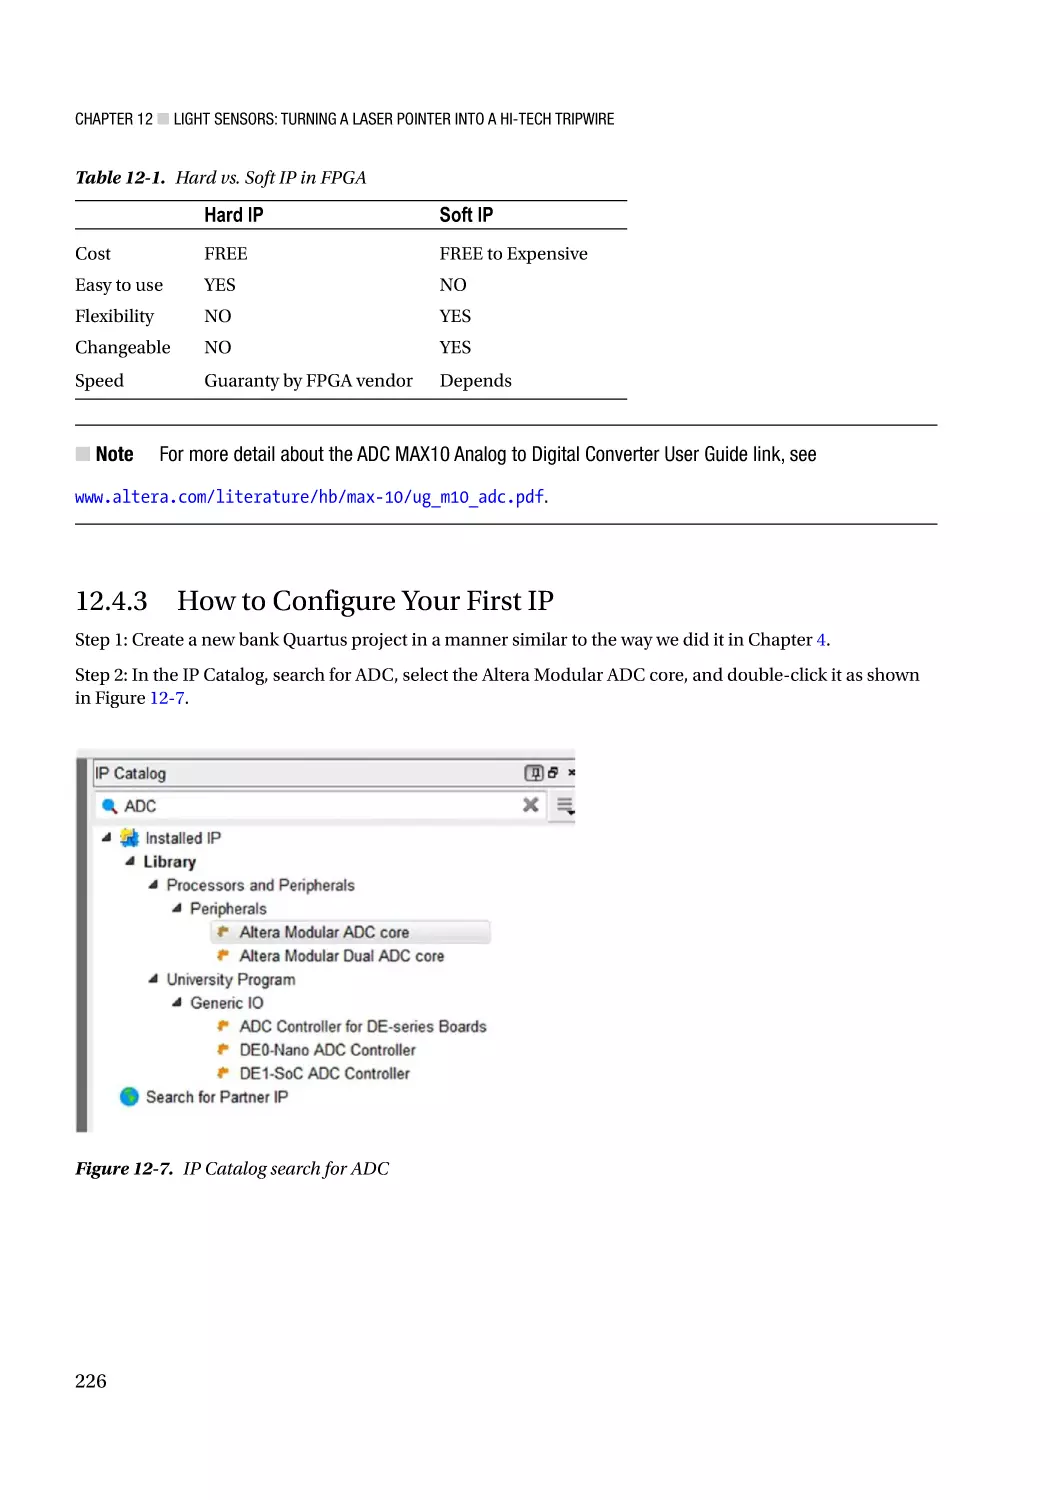 12.4.3 How to Configure Your First IP